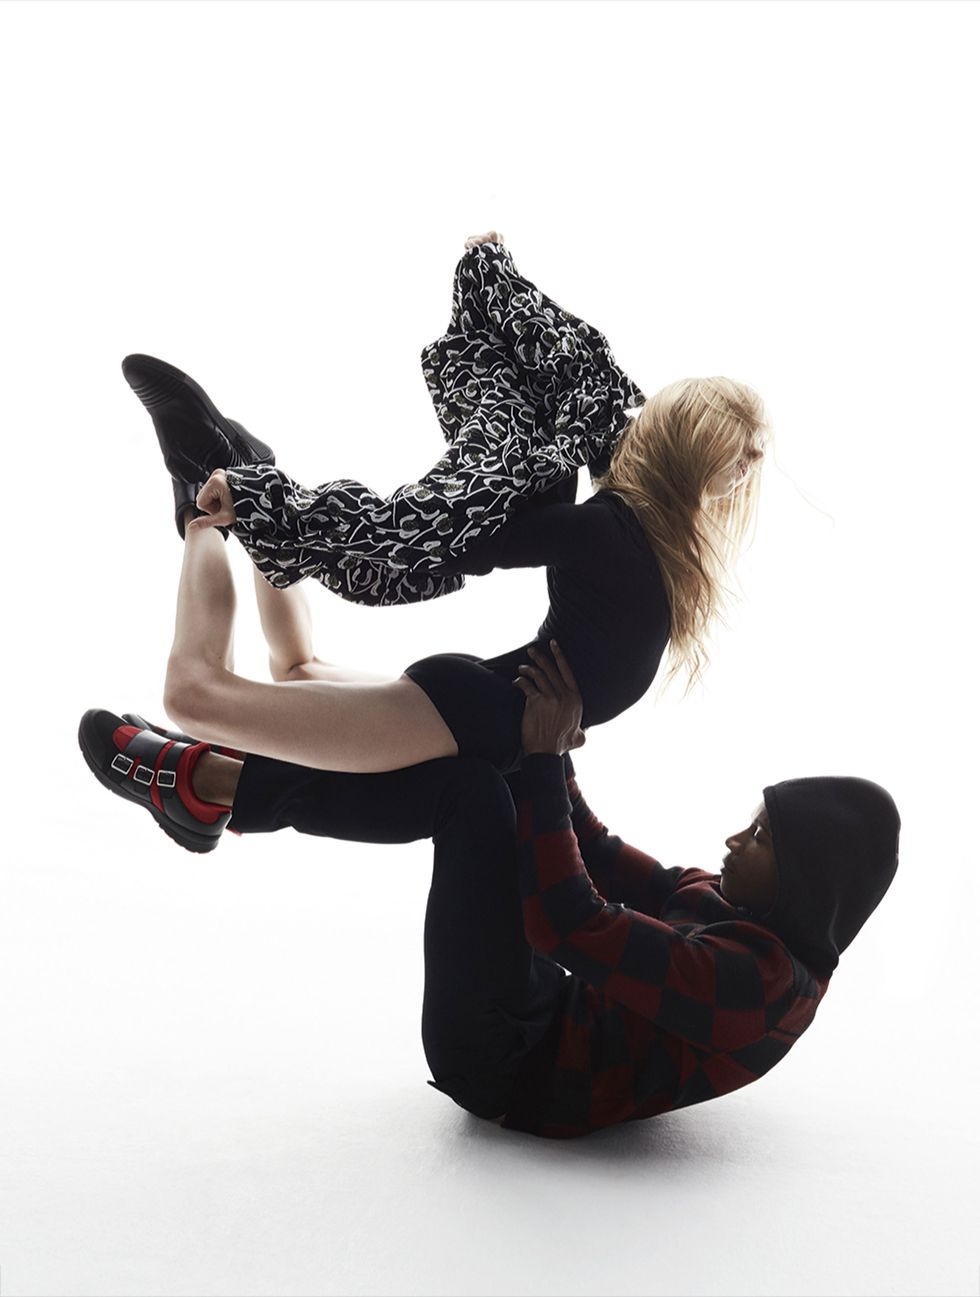 The Royal Ballet's Sarah Lamb and Eric Underwood photographed by Aitken Jolly